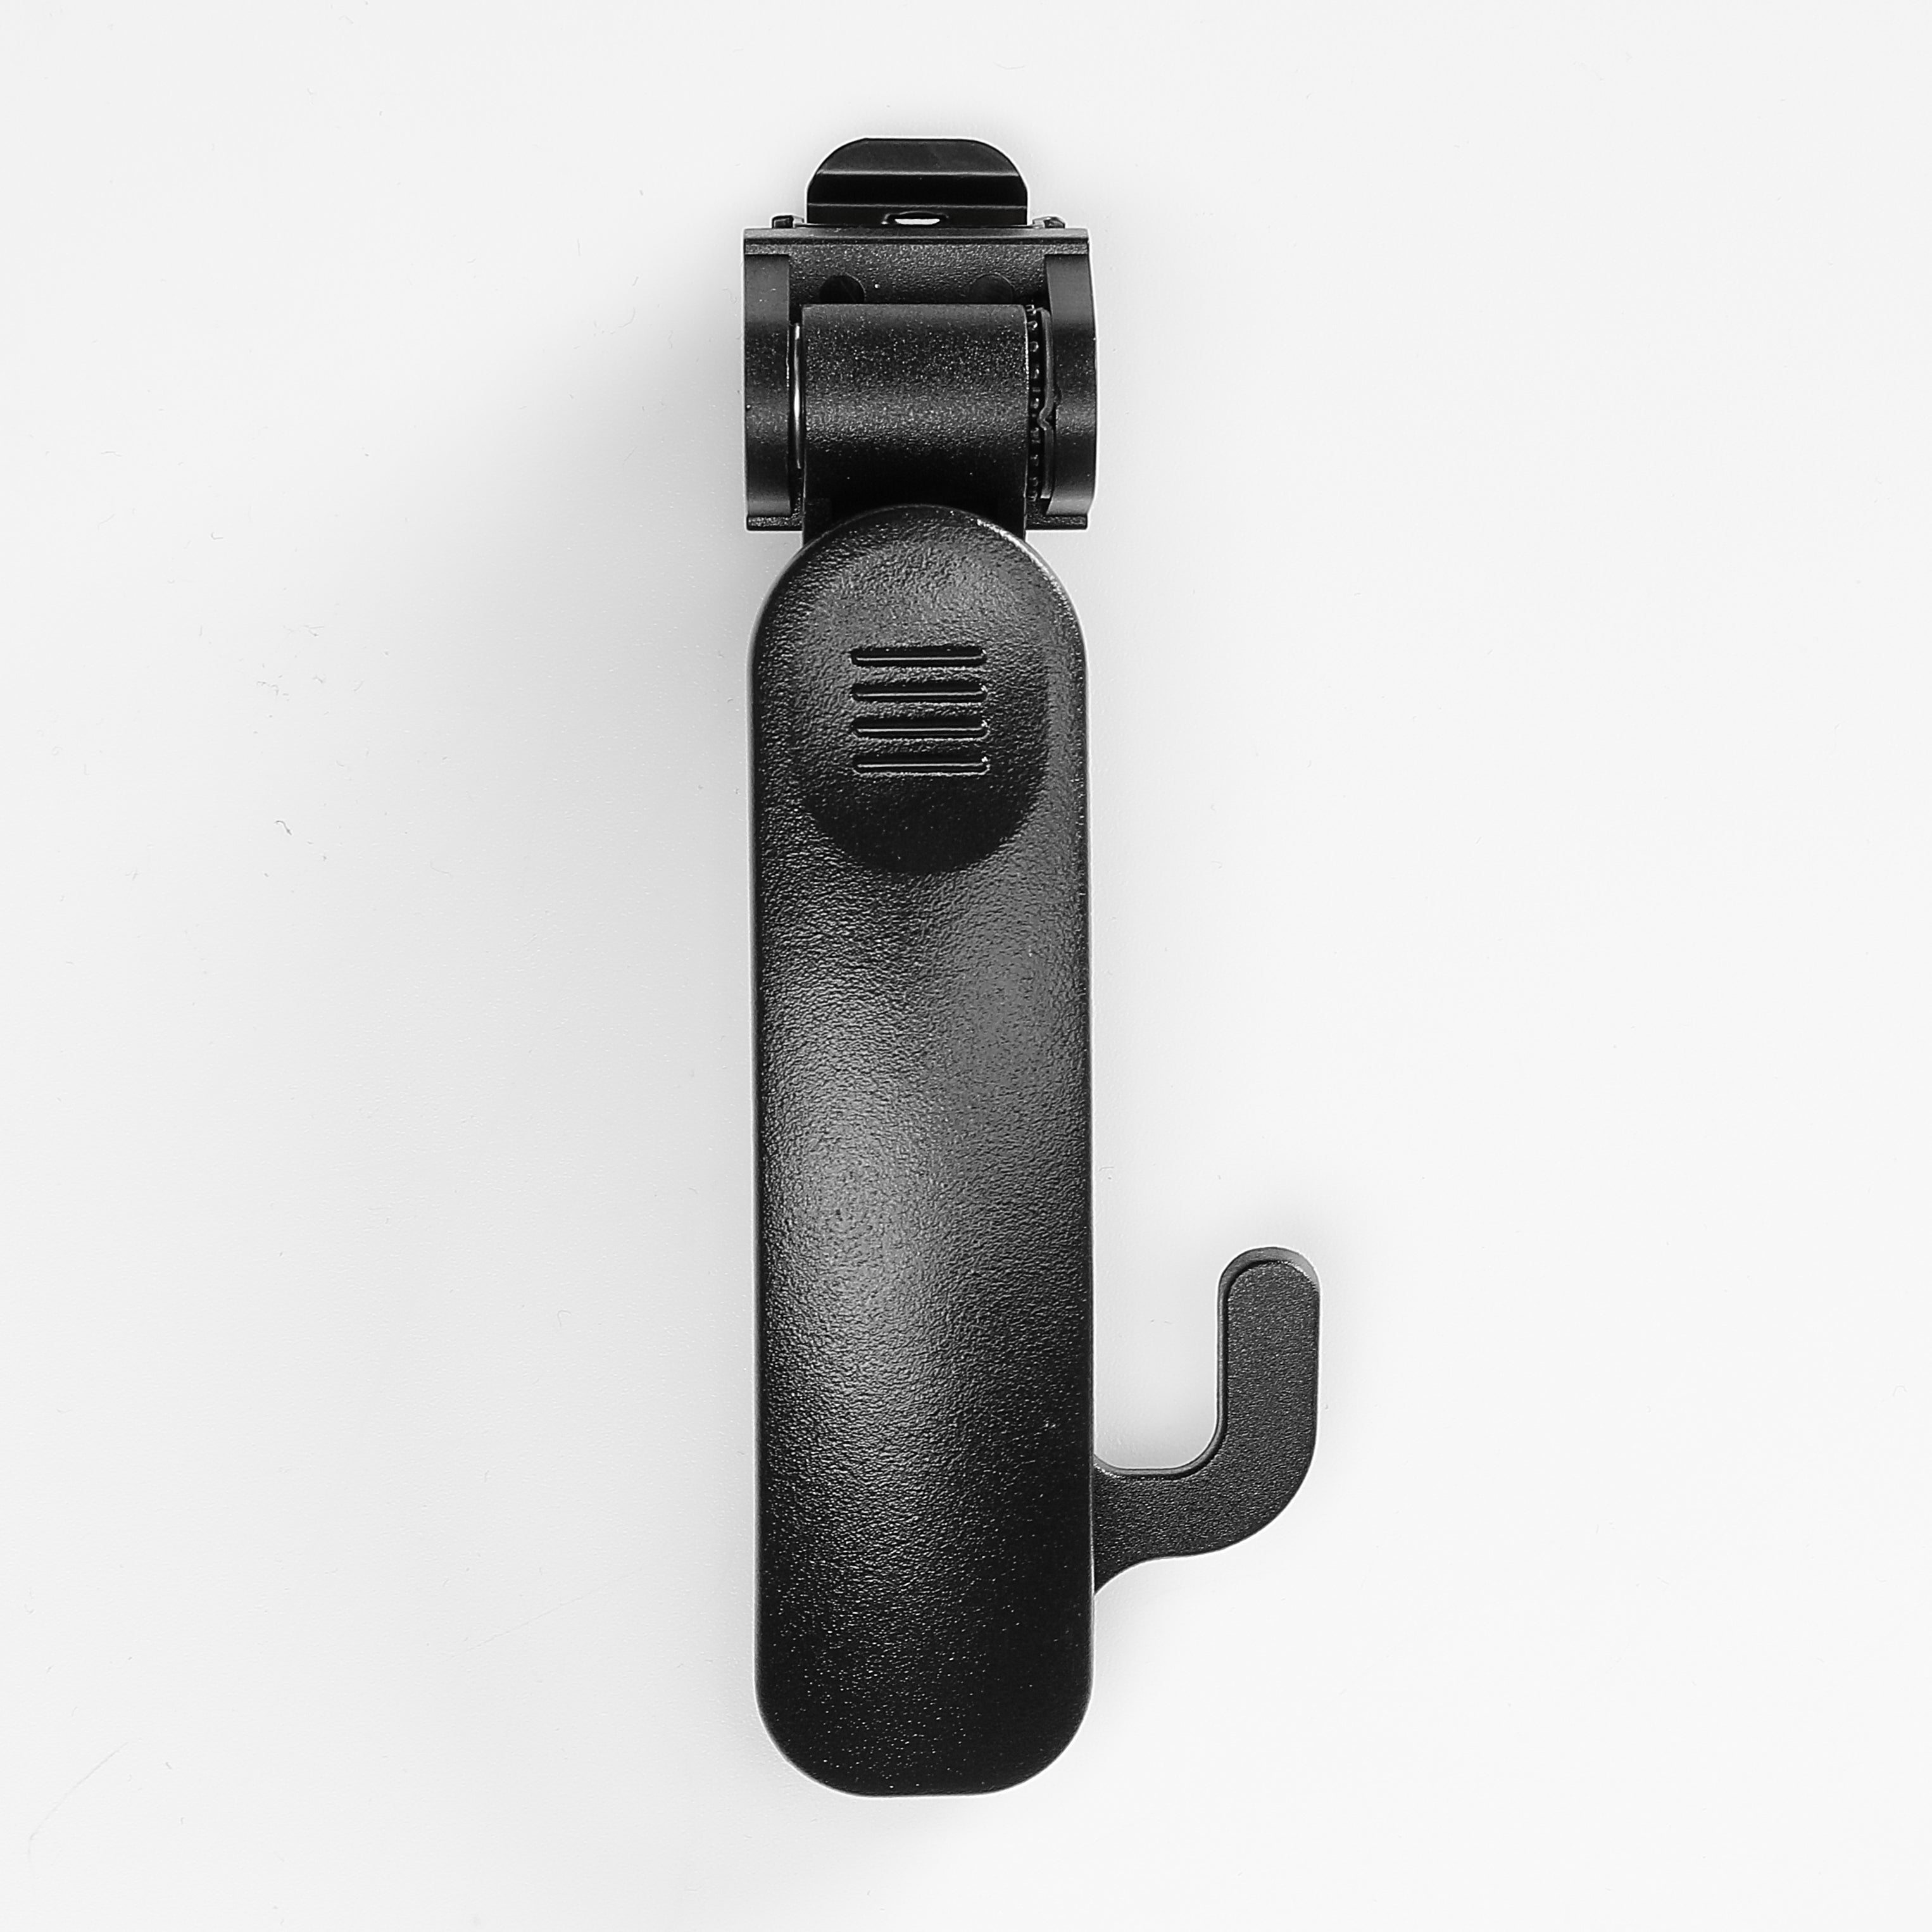 BOBLOV M5 / T5 Long Clip, A Shoulder Clip ONLY M5 OR T5 Body Worn Camera, Only Included ONE Long Clip (Can't fit Other Models)